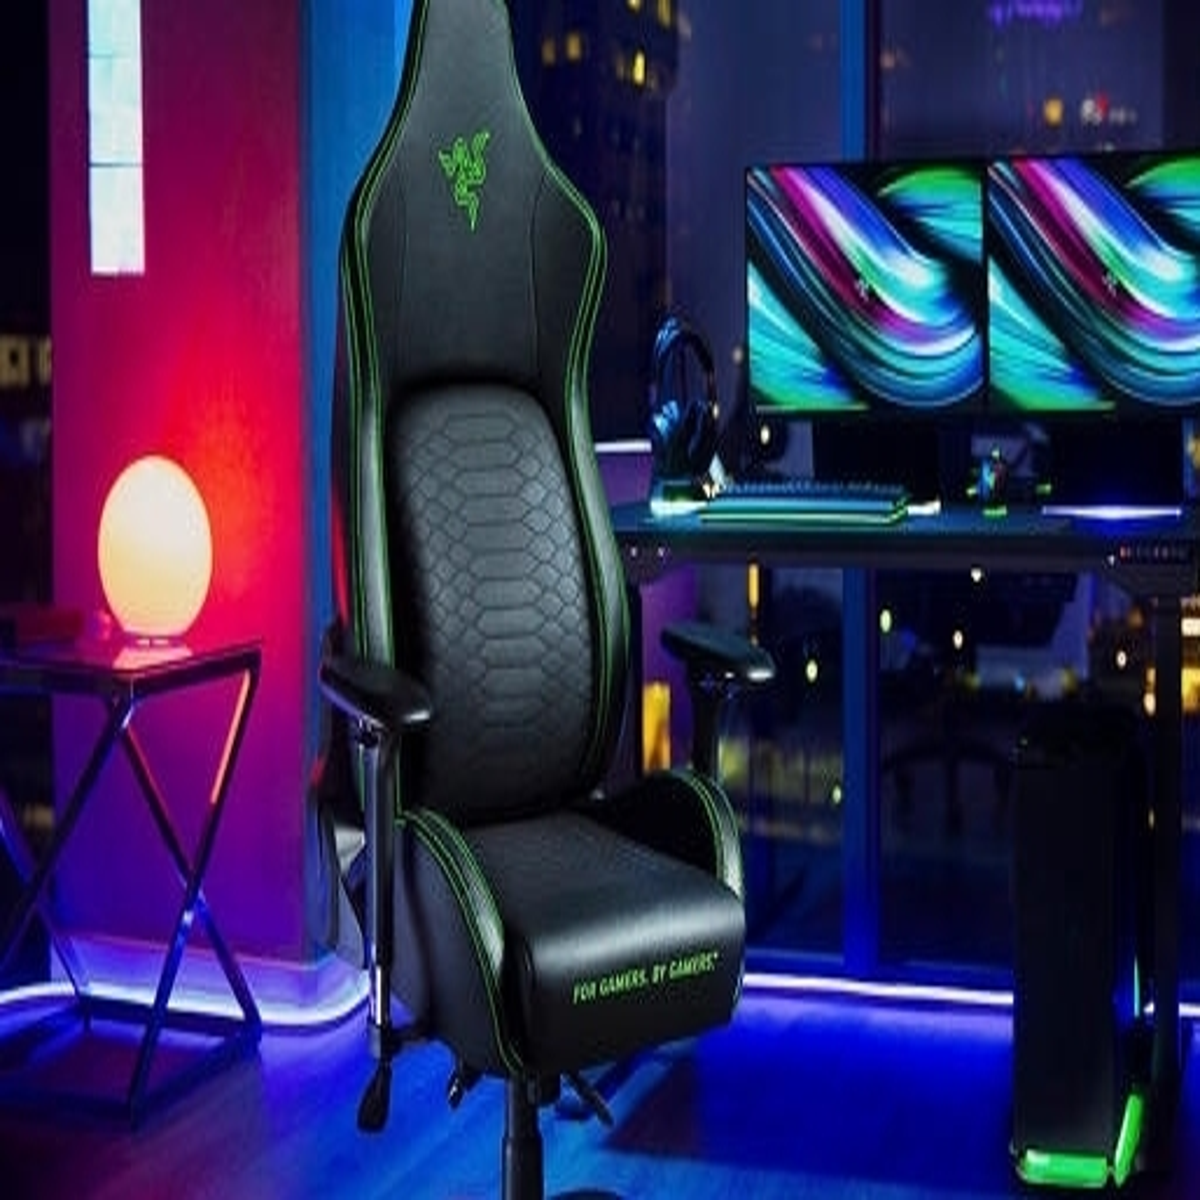 The Razer Iskur gaming Friday on offer for this Black $350 is chair